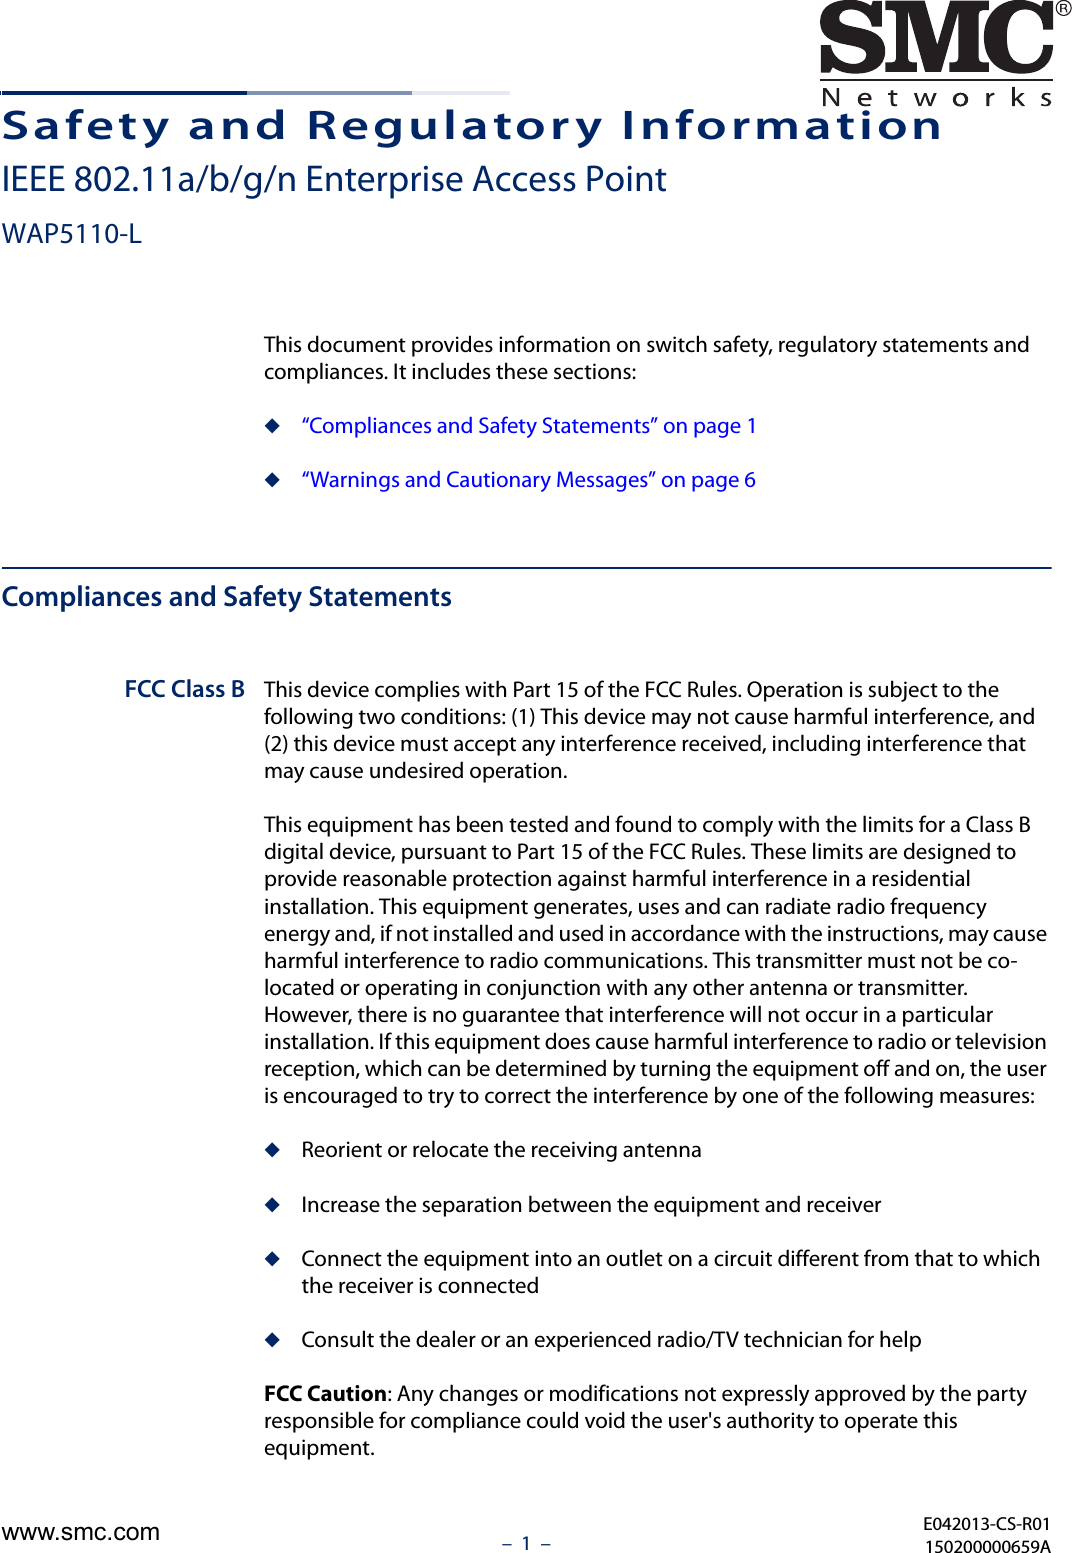 –  1  –Safety and Regulatory InformationIEEE 802.11a/b/g/n Enterprise Access PointWAP5110-LThis document provides information on switch safety, regulatory statements and compliances. It includes these sections:◆“Compliances and Safety Statements” on page 1◆“Warnings and Cautionary Messages” on page 6Compliances and Safety StatementsFCC Class B This device complies with Part 15 of the FCC Rules. Operation is subject to the following two conditions: (1) This device may not cause harmful interference, and (2) this device must accept any interference received, including interference that may cause undesired operation.This equipment has been tested and found to comply with the limits for a Class B digital device, pursuant to Part 15 of the FCC Rules. These limits are designed to provide reasonable protection against harmful interference in a residential installation. This equipment generates, uses and can radiate radio frequency energy and, if not installed and used in accordance with the instructions, may cause harmful interference to radio communications. This transmitter must not be co-located or operating in conjunction with any other antenna or transmitter. However, there is no guarantee that interference will not occur in a particular installation. If this equipment does cause harmful interference to radio or television reception, which can be determined by turning the equipment off and on, the user is encouraged to try to correct the interference by one of the following measures:◆Reorient or relocate the receiving antenna◆Increase the separation between the equipment and receiver◆Connect the equipment into an outlet on a circuit different from that to which the receiver is connected◆Consult the dealer or an experienced radio/TV technician for helpFCC Caution: Any changes or modifications not expressly approved by the party responsible for compliance could void the user&apos;s authority to operate this equipment. E042013-CS-R01150200000659Awww.smc.com